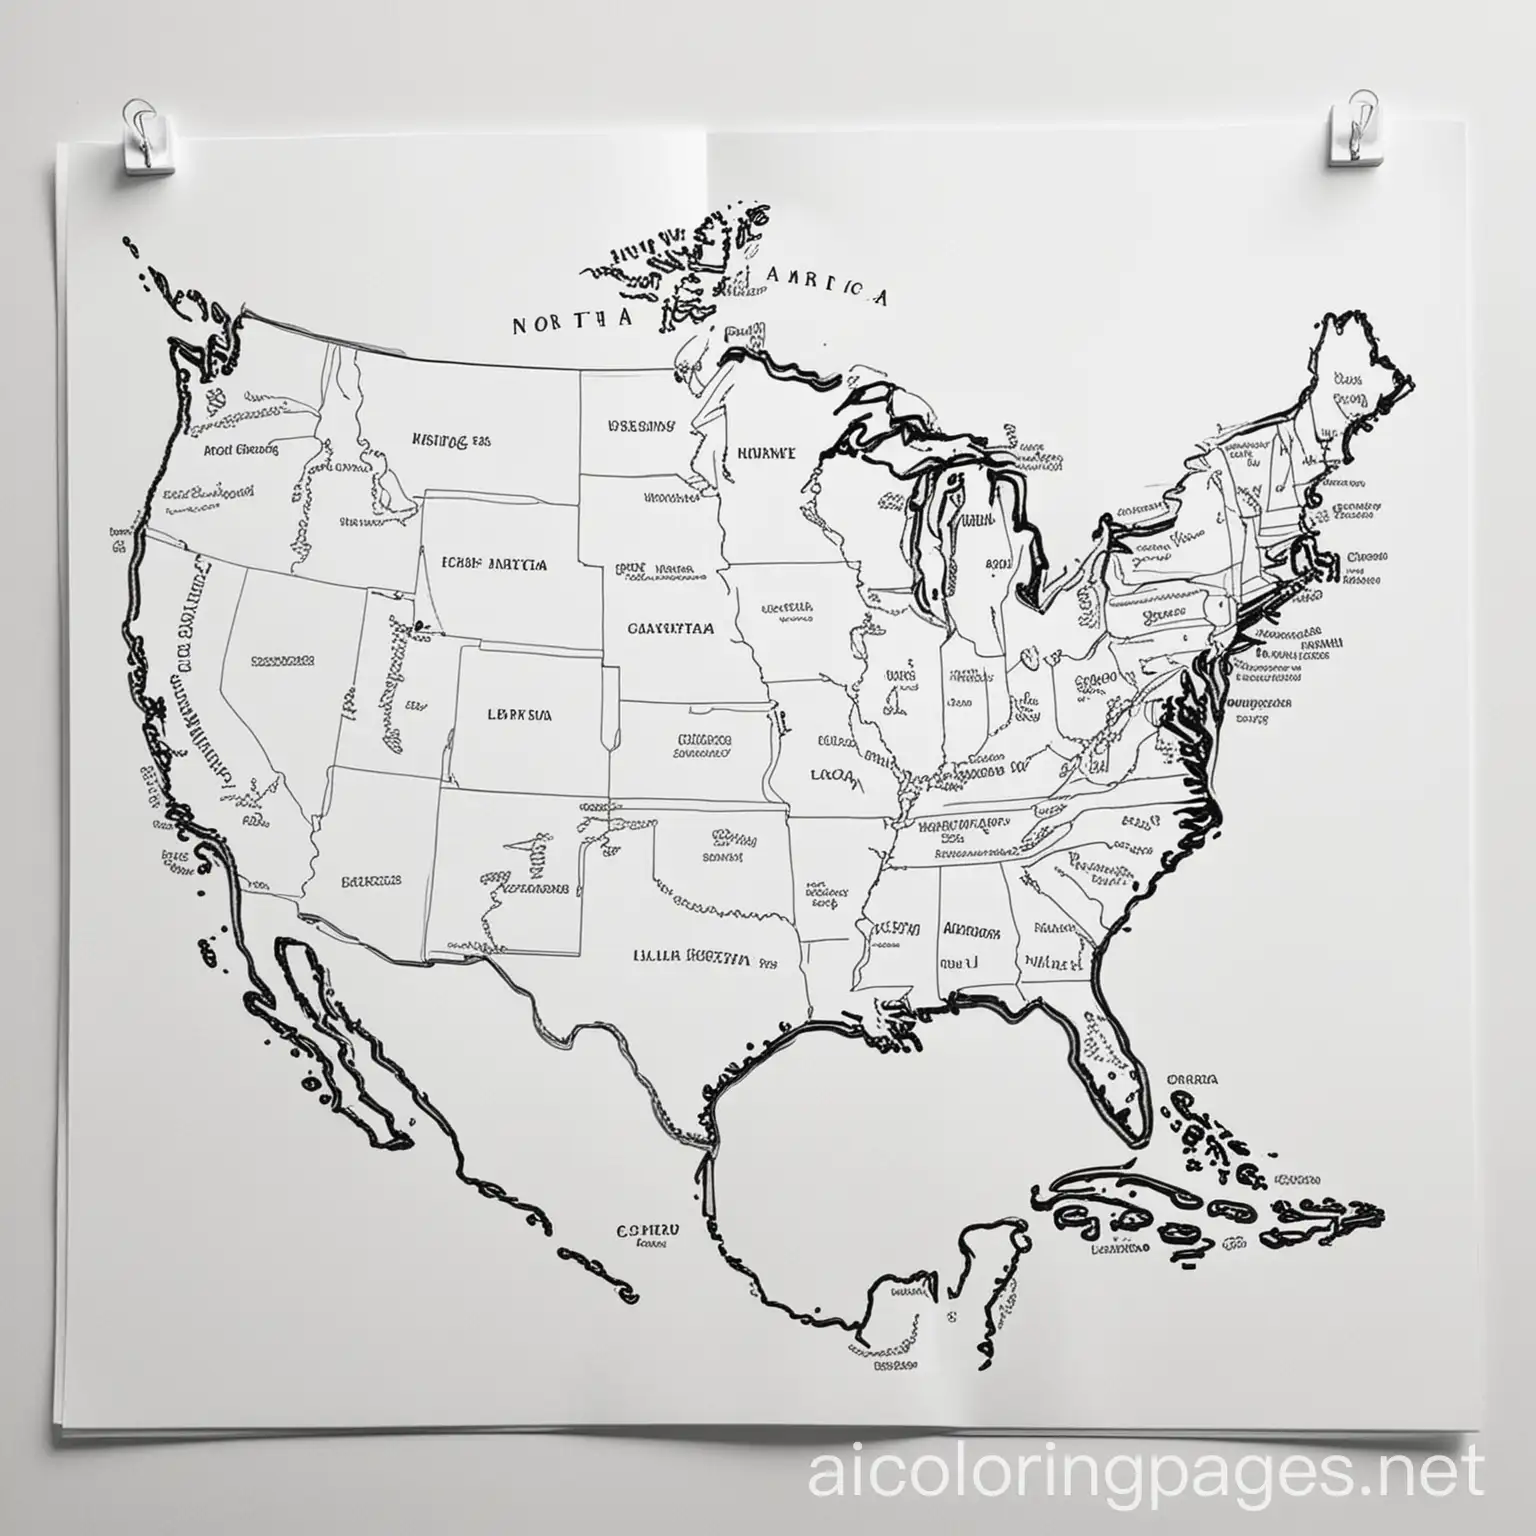 simple map of north america with 10 simple landmarks no writing only clear pictures, Coloring Page, black and white, line art, white background, Simplicity, Ample White Space.